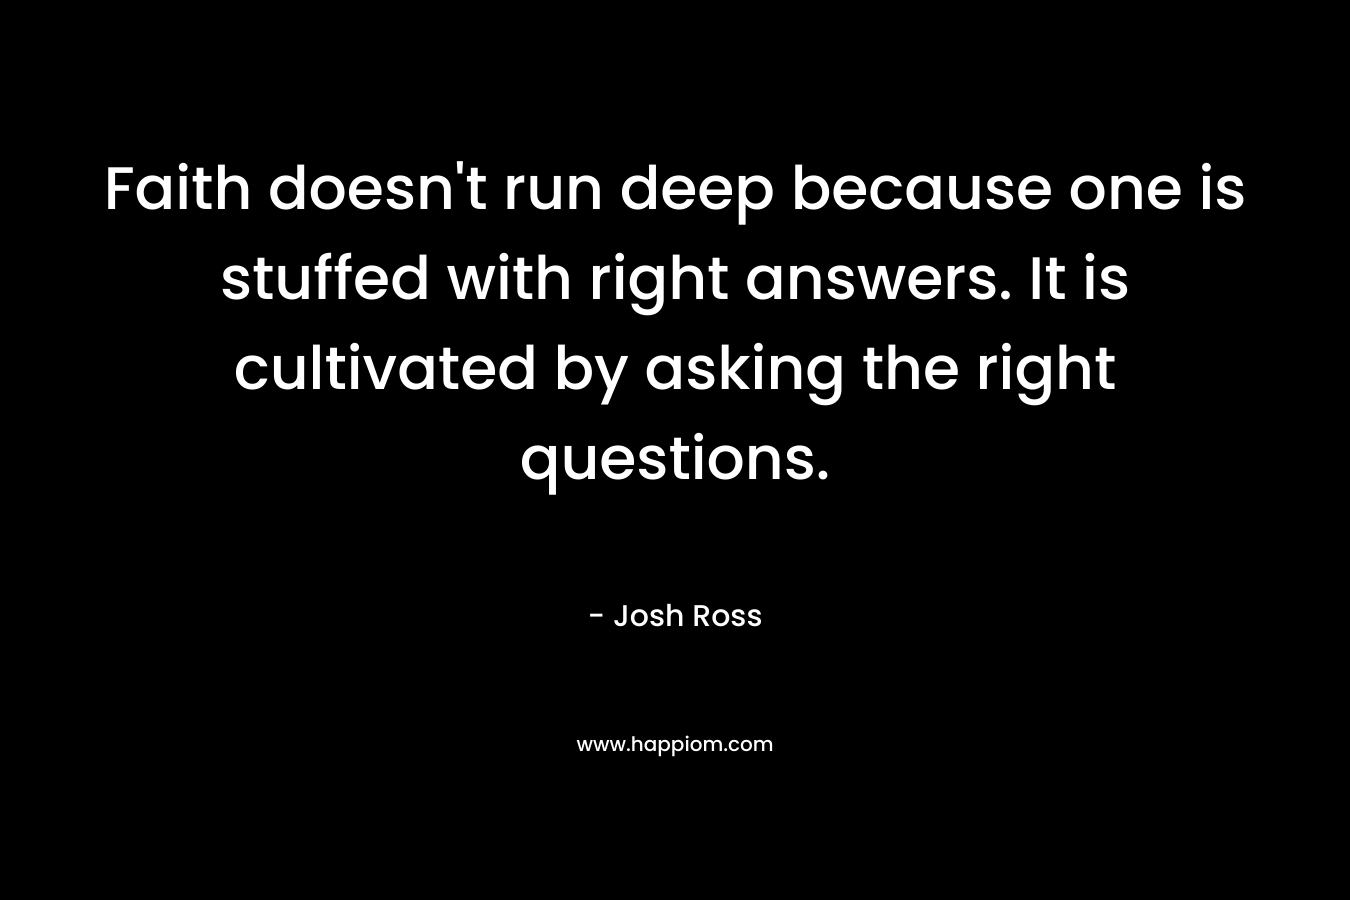 Faith doesn’t run deep because one is stuffed with right answers. It is cultivated by asking the right questions. – Josh Ross